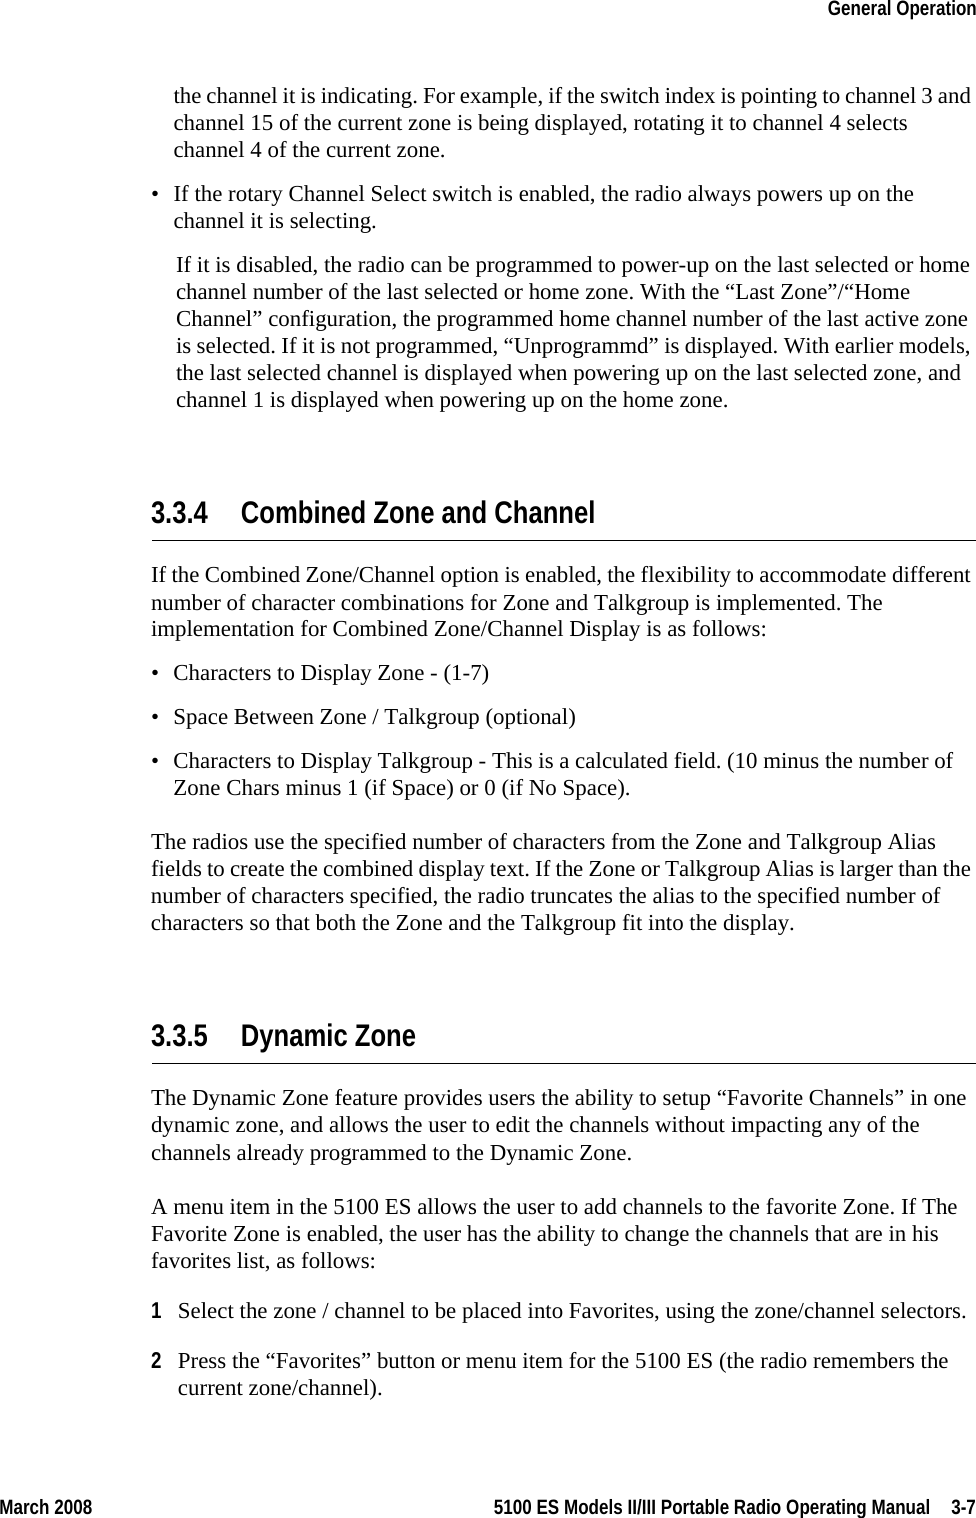 March 2008 5100 ES Models II/III Portable Radio Operating Manual  3-7General Operationthe channel it is indicating. For example, if the switch index is pointing to channel 3 and channel 15 of the current zone is being displayed, rotating it to channel 4 selects channel 4 of the current zone.• If the rotary Channel Select switch is enabled, the radio always powers up on the channel it is selecting. If it is disabled, the radio can be programmed to power-up on the last selected or home channel number of the last selected or home zone. With the “Last Zone”/“Home Channel” configuration, the programmed home channel number of the last active zone is selected. If it is not programmed, “Unprogrammd” is displayed. With earlier models, the last selected channel is displayed when powering up on the last selected zone, and channel 1 is displayed when powering up on the home zone.3.3.4 Combined Zone and ChannelIf the Combined Zone/Channel option is enabled, the flexibility to accommodate different number of character combinations for Zone and Talkgroup is implemented. The implementation for Combined Zone/Channel Display is as follows:• Characters to Display Zone - (1-7)• Space Between Zone / Talkgroup (optional)• Characters to Display Talkgroup - This is a calculated field. (10 minus the number of Zone Chars minus 1 (if Space) or 0 (if No Space).The radios use the specified number of characters from the Zone and Talkgroup Alias fields to create the combined display text. If the Zone or Talkgroup Alias is larger than the number of characters specified, the radio truncates the alias to the specified number of characters so that both the Zone and the Talkgroup fit into the display.3.3.5 Dynamic ZoneThe Dynamic Zone feature provides users the ability to setup “Favorite Channels” in one dynamic zone, and allows the user to edit the channels without impacting any of the channels already programmed to the Dynamic Zone.A menu item in the 5100 ES allows the user to add channels to the favorite Zone. If The Favorite Zone is enabled, the user has the ability to change the channels that are in his favorites list, as follows: 1Select the zone / channel to be placed into Favorites, using the zone/channel selectors.2Press the “Favorites” button or menu item for the 5100 ES (the radio remembers the current zone/channel).